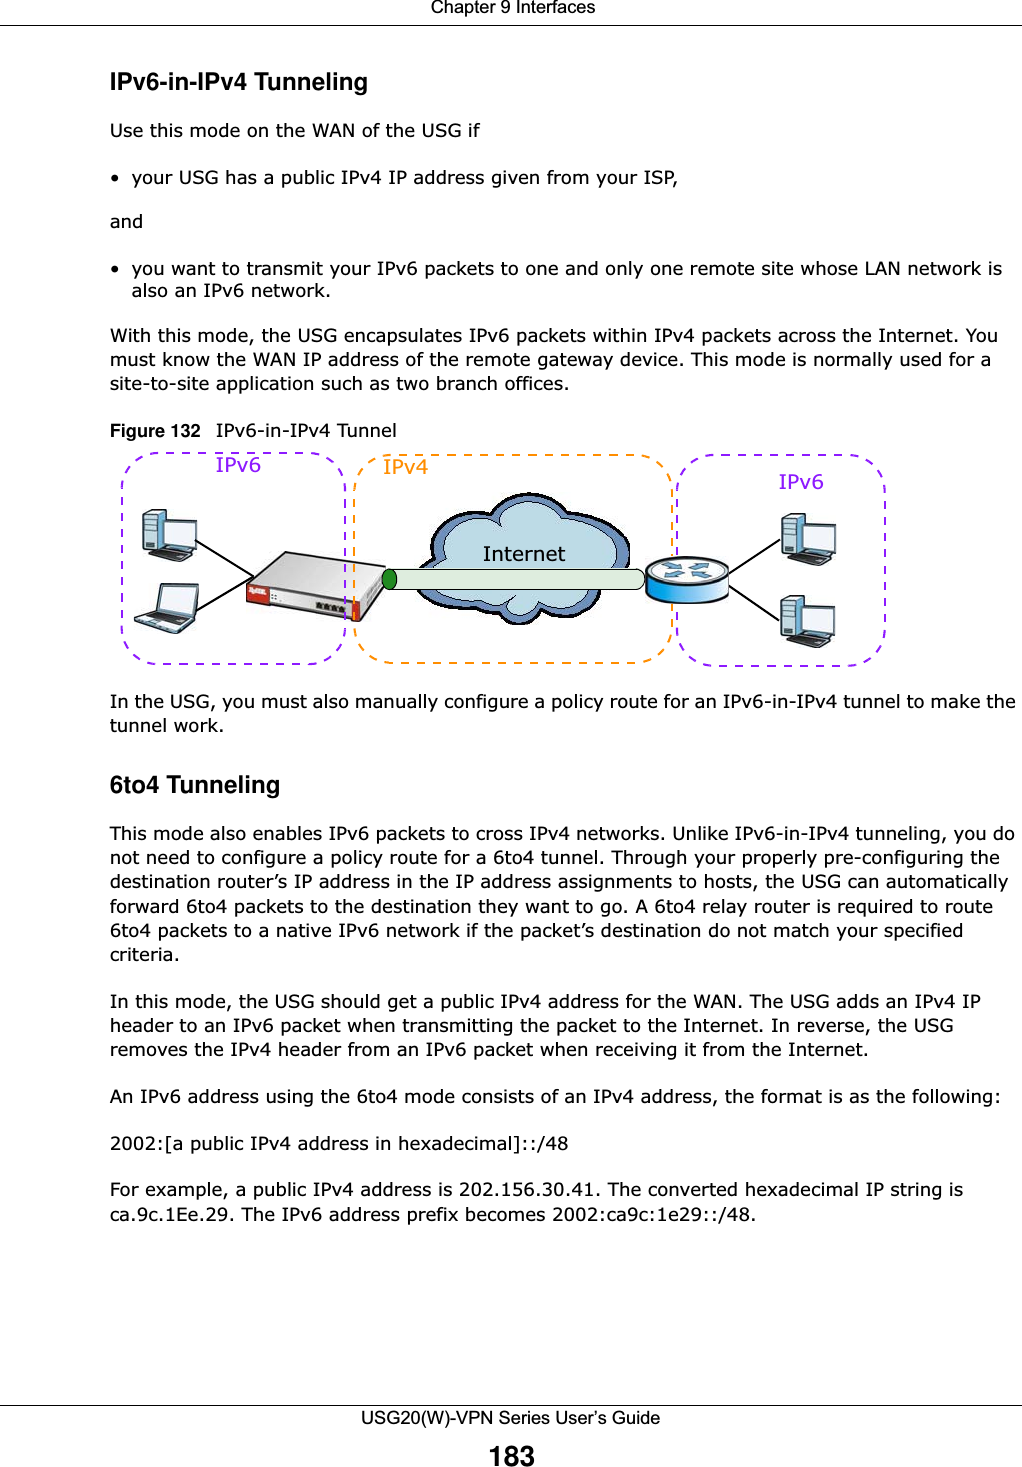  Chapter 9 InterfacesUSG20(W)-VPN Series User’s Guide183IPv6-in-IPv4 TunnelingUse this mode on the WAN of the USG if • your USG has a public IPv4 IP address given from your ISP,and• you want to transmit your IPv6 packets to one and only one remote site whose LAN network is also an IPv6 network. With this mode, the USG encapsulates IPv6 packets within IPv4 packets across the Internet. You must know the WAN IP address of the remote gateway device. This mode is normally used for a site-to-site application such as two branch offices.Figure 132   IPv6-in-IPv4 Tunnel In the USG, you must also manually configure a policy route for an IPv6-in-IPv4 tunnel to make the tunnel work.6to4 TunnelingThis mode also enables IPv6 packets to cross IPv4 networks. Unlike IPv6-in-IPv4 tunneling, you do not need to configure a policy route for a 6to4 tunnel. Through your properly pre-configuring the destination router’s IP address in the IP address assignments to hosts, the USG can automatically forward 6to4 packets to the destination they want to go. A 6to4 relay router is required to route 6to4 packets to a native IPv6 network if the packet’s destination do not match your specified criteria.In this mode, the USG should get a public IPv4 address for the WAN. The USG adds an IPv4 IP header to an IPv6 packet when transmitting the packet to the Internet. In reverse, the USG removes the IPv4 header from an IPv6 packet when receiving it from the Internet. An IPv6 address using the 6to4 mode consists of an IPv4 address, the format is as the following:2002:[a public IPv4 address in hexadecimal]::/48For example, a public IPv4 address is 202.156.30.41. The converted hexadecimal IP string is ca.9c.1Ee.29. The IPv6 address prefix becomes 2002:ca9c:1e29::/48.IPv6 IPv4 IPv6 Internet